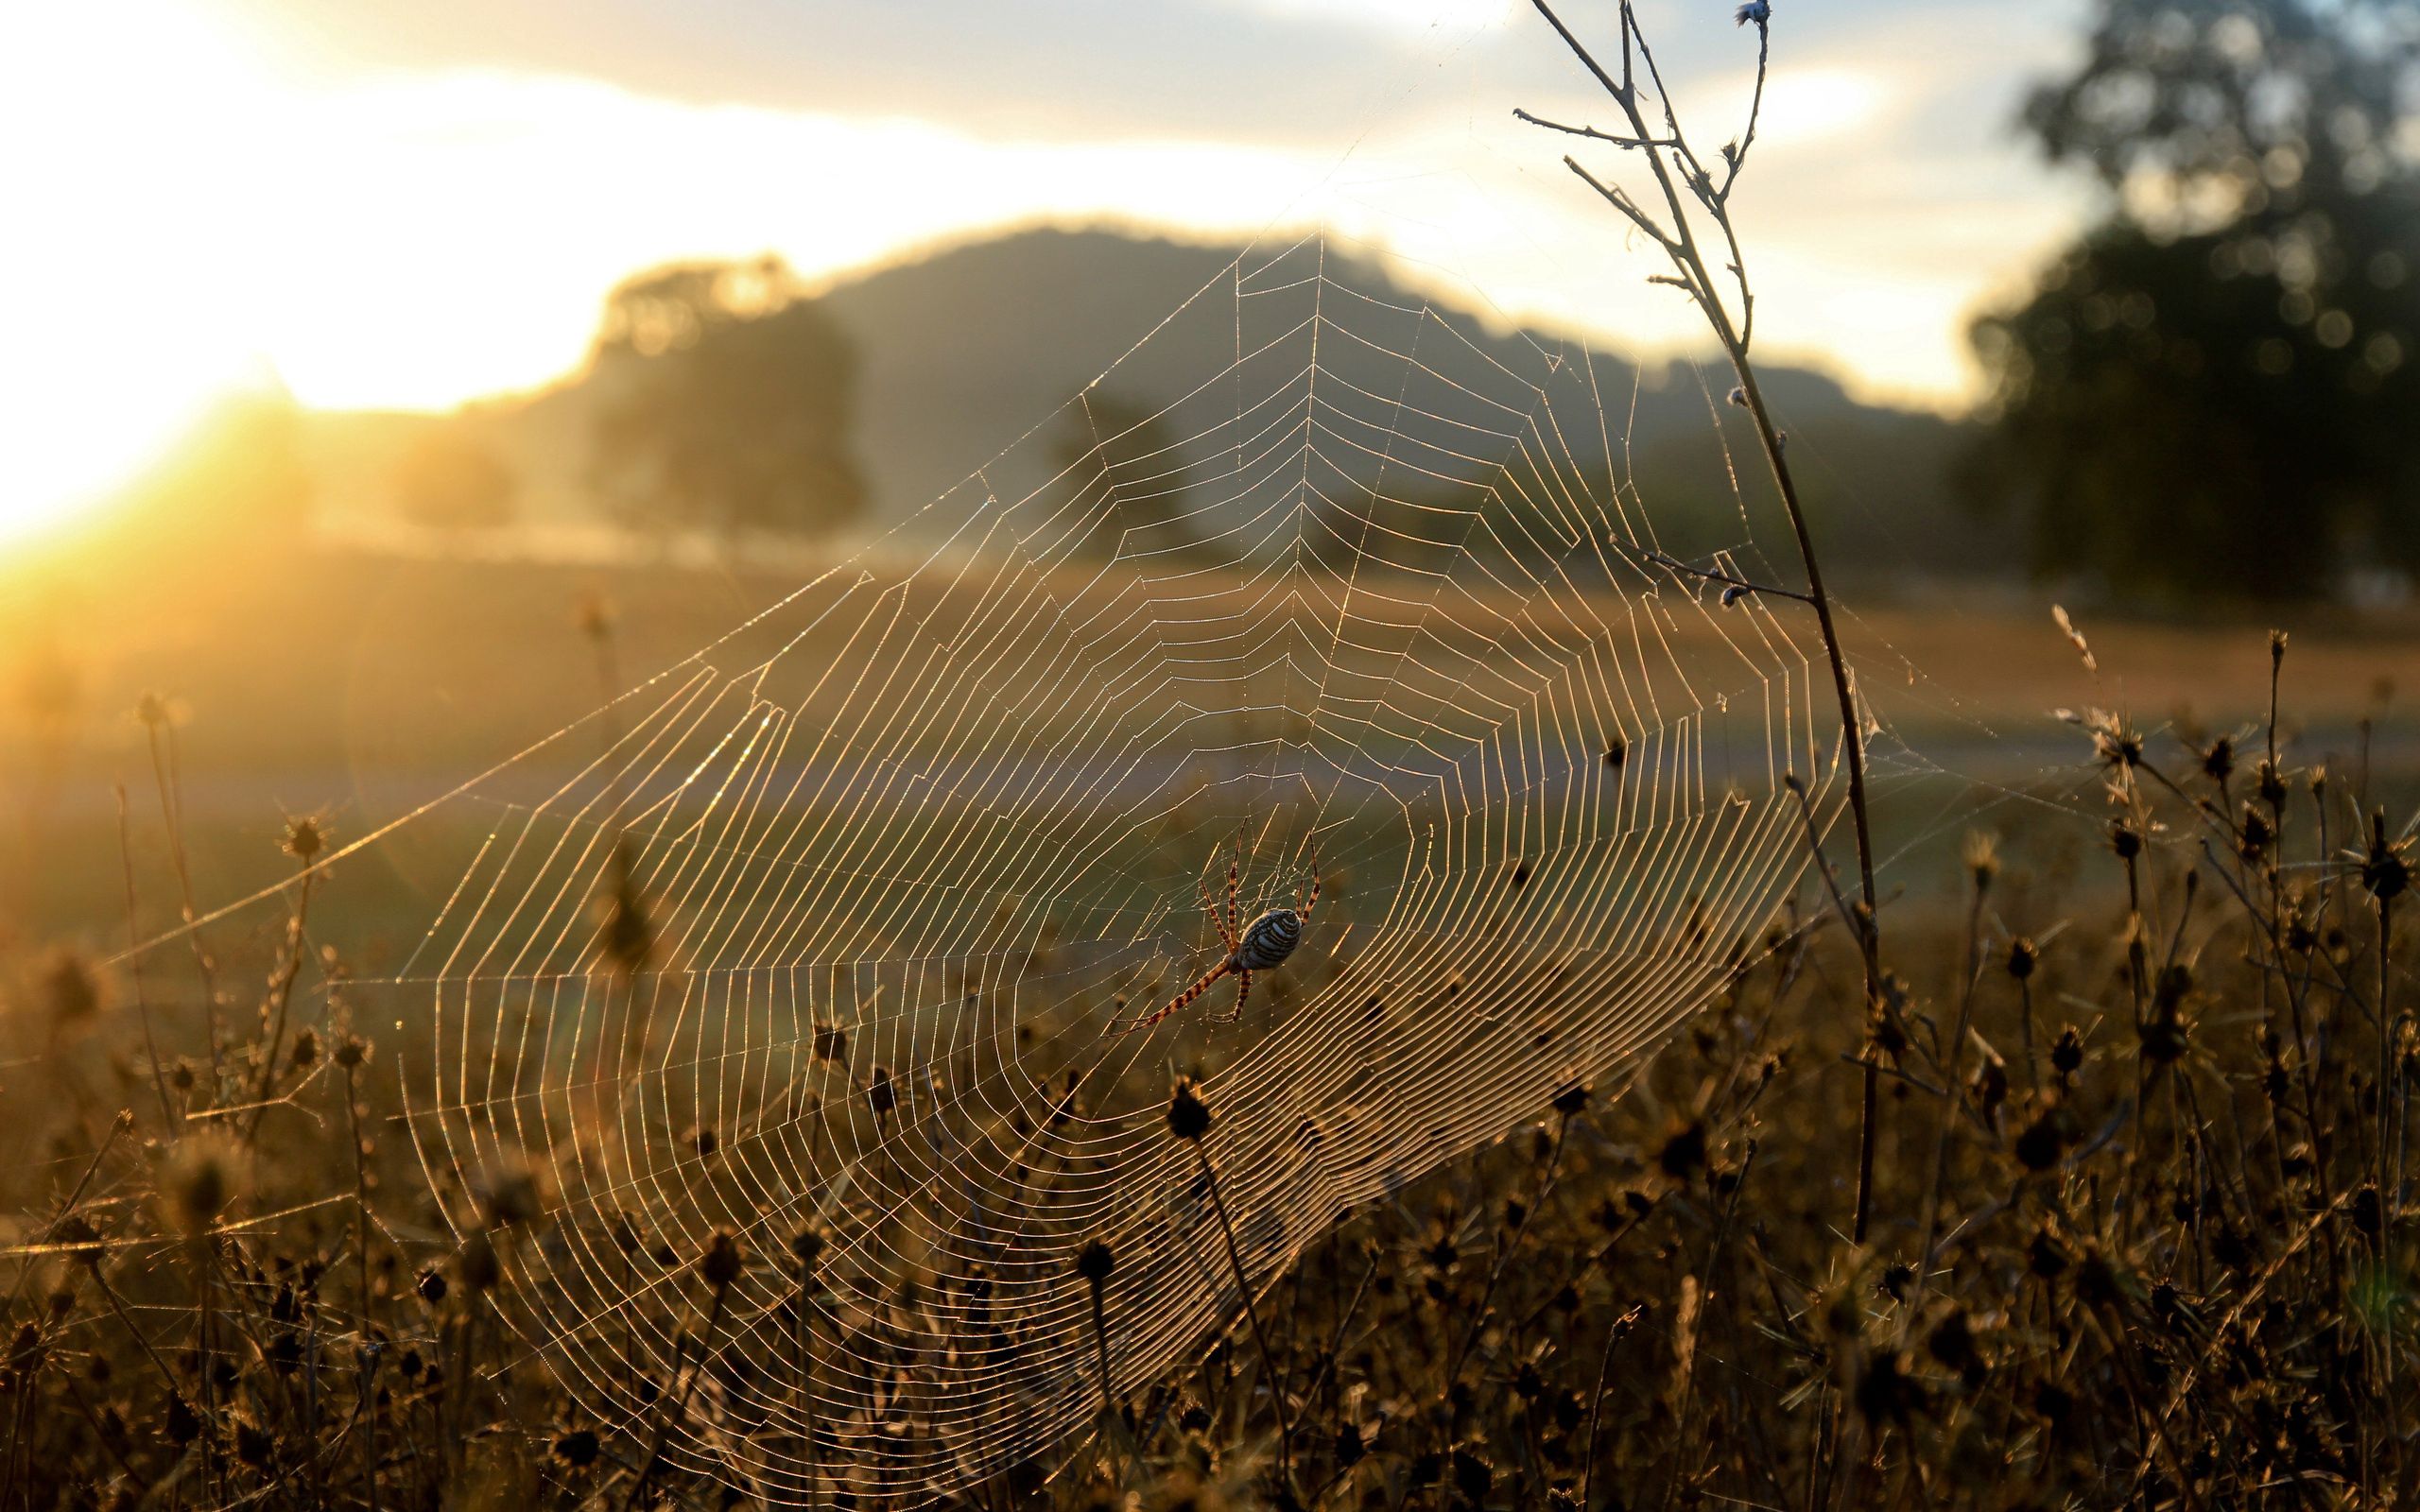 nature, grass, sun, web, shine, light, withered, it's a sly, dry, spider